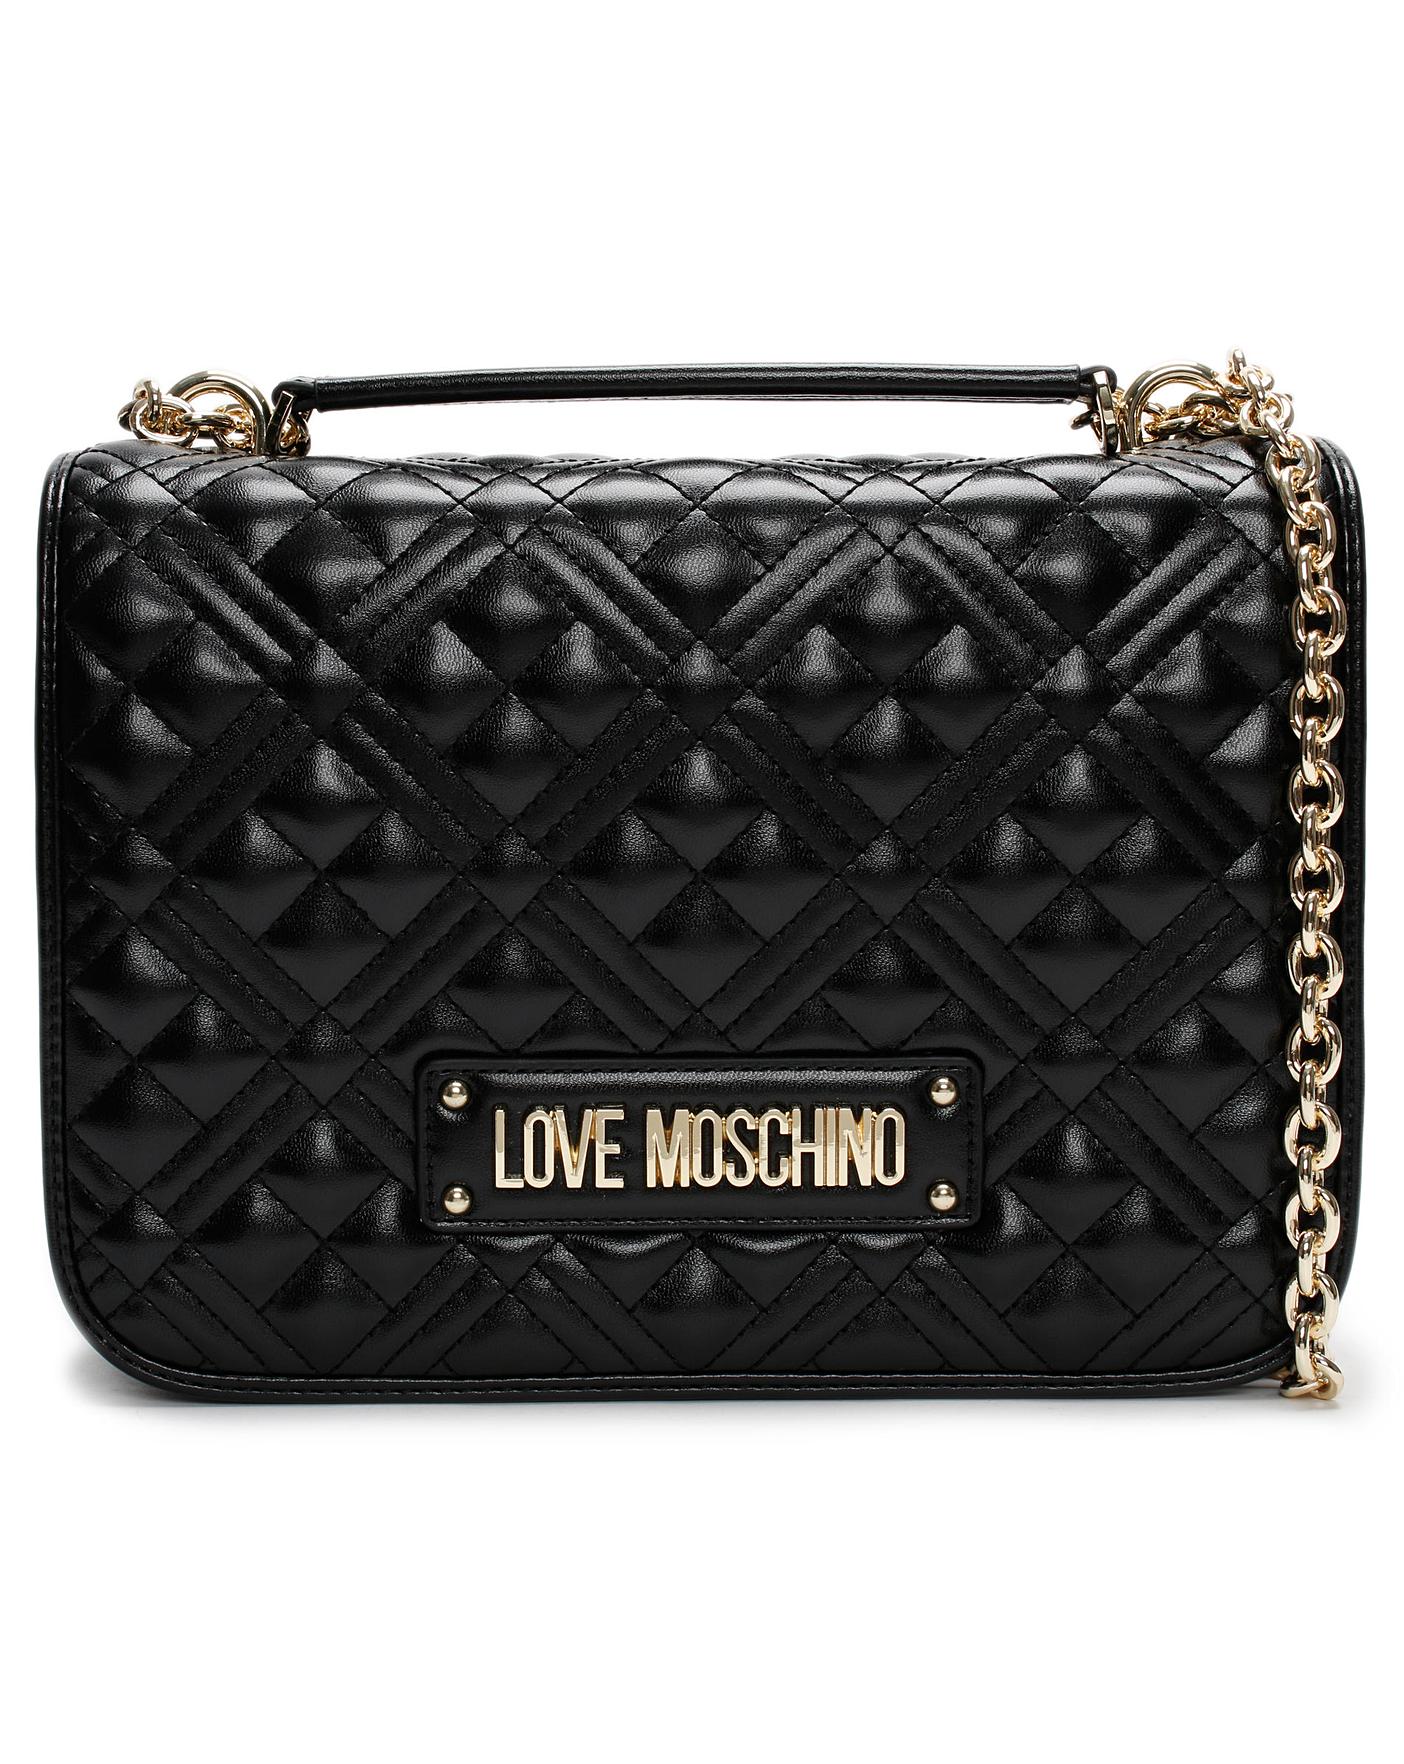 Best Leather Handbags by Love Moschino 